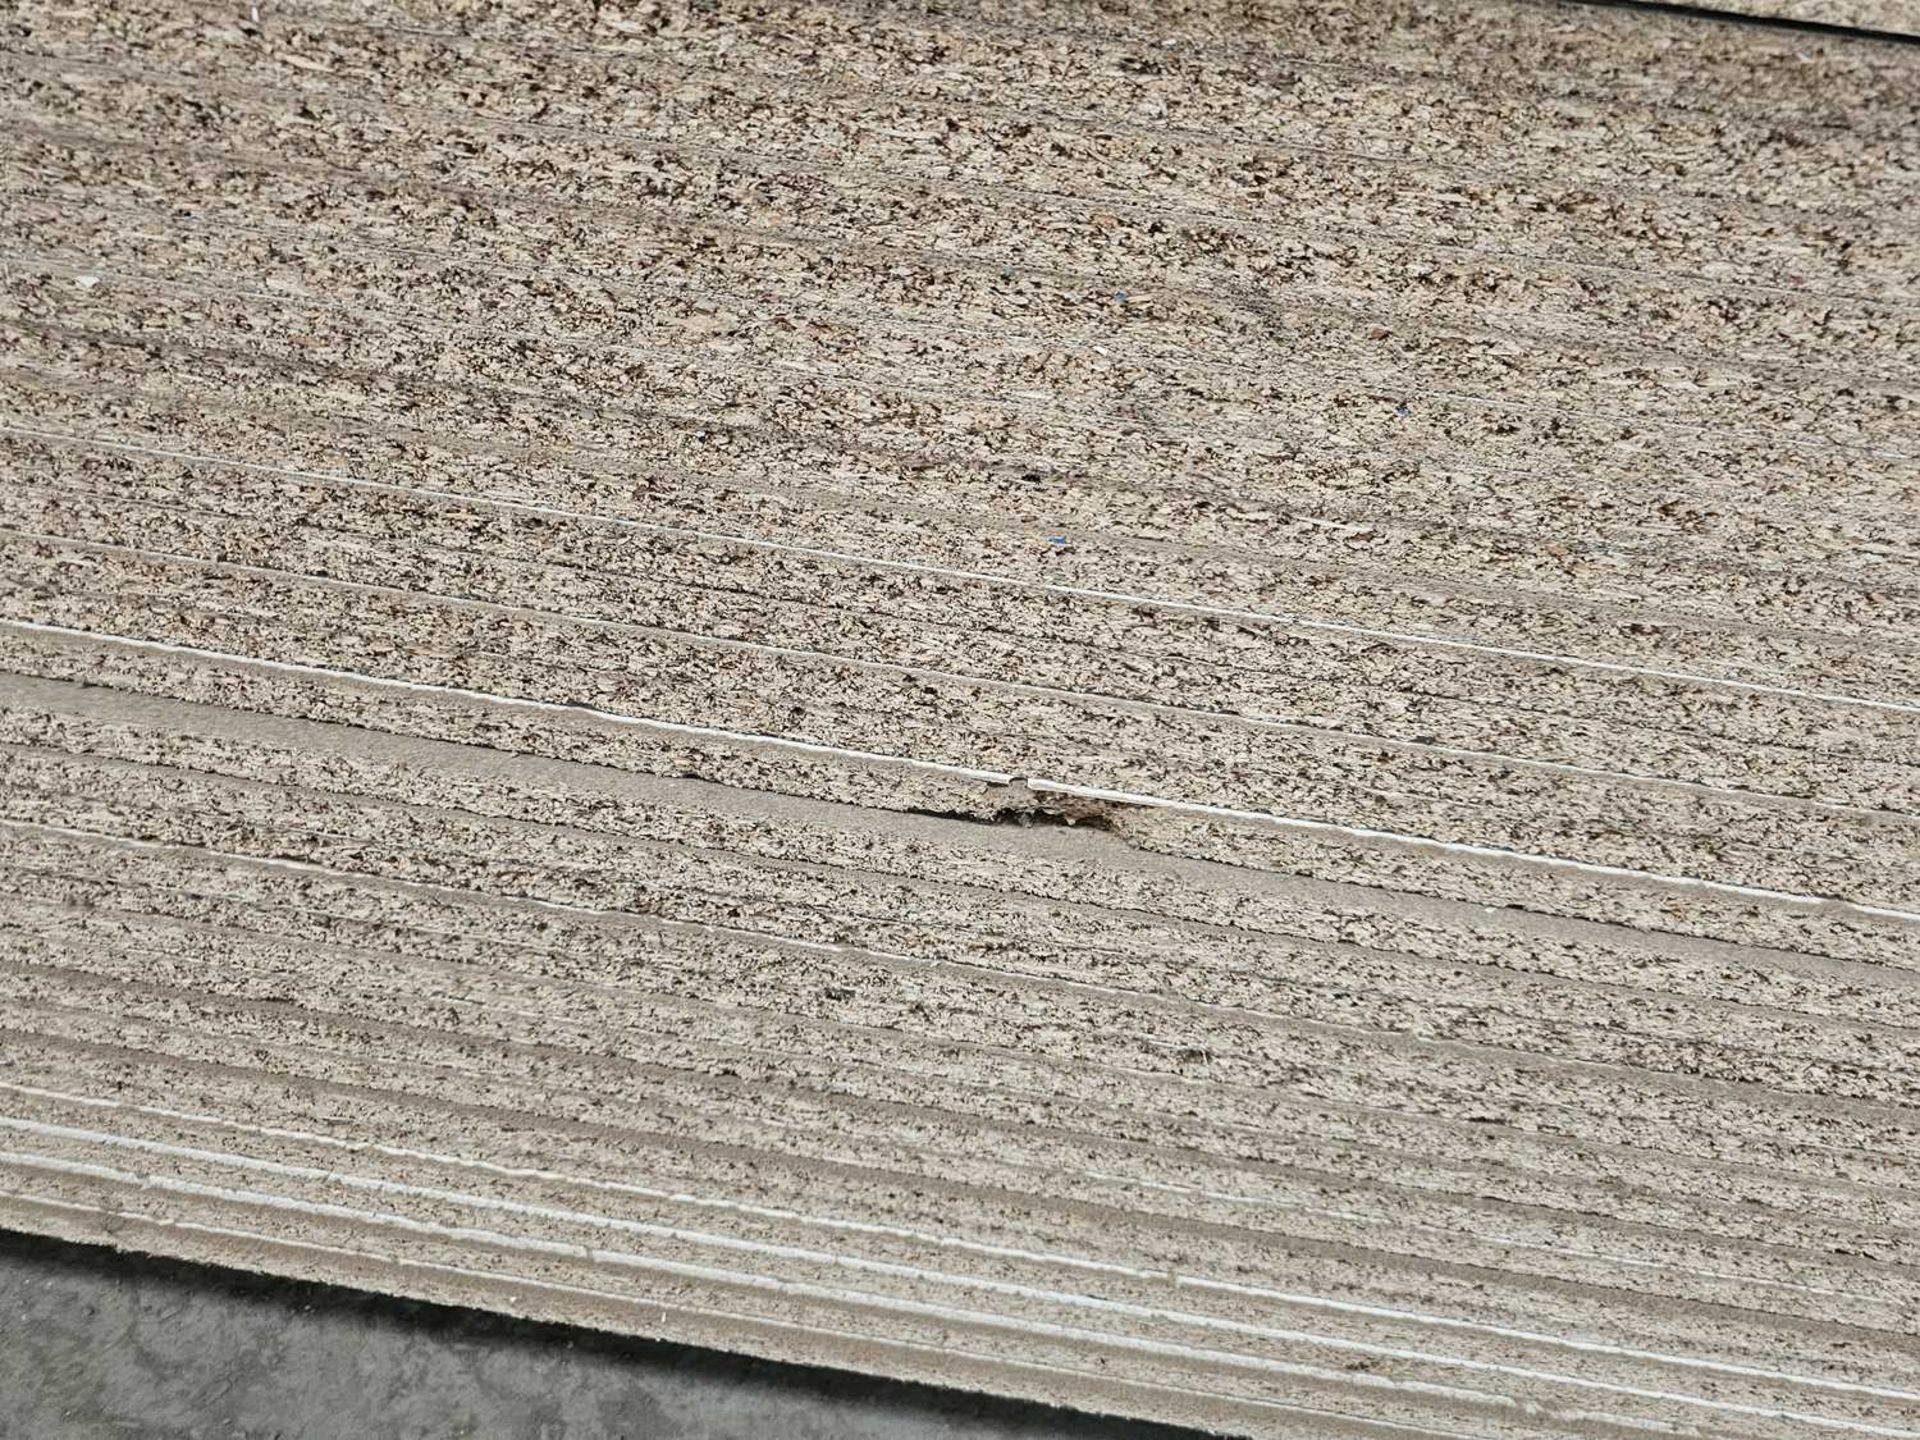 Selection of Chipboard Sheets (351cm x 205cm x 20mm - 30 of) - Image 3 of 3